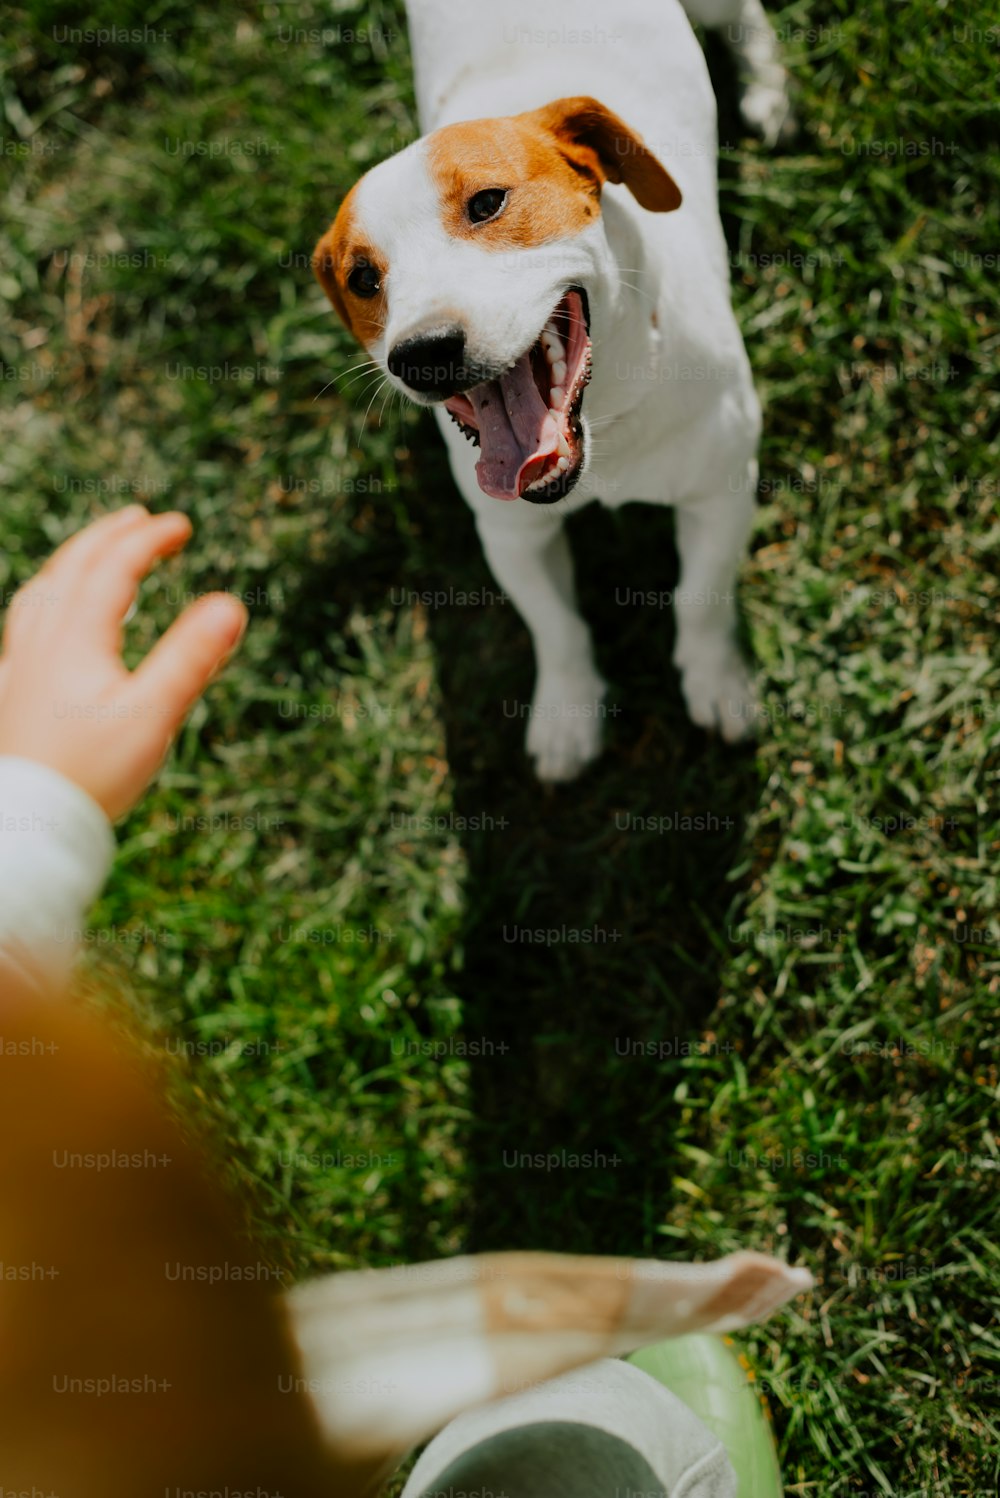 a dog yawns while a person holds his hand out